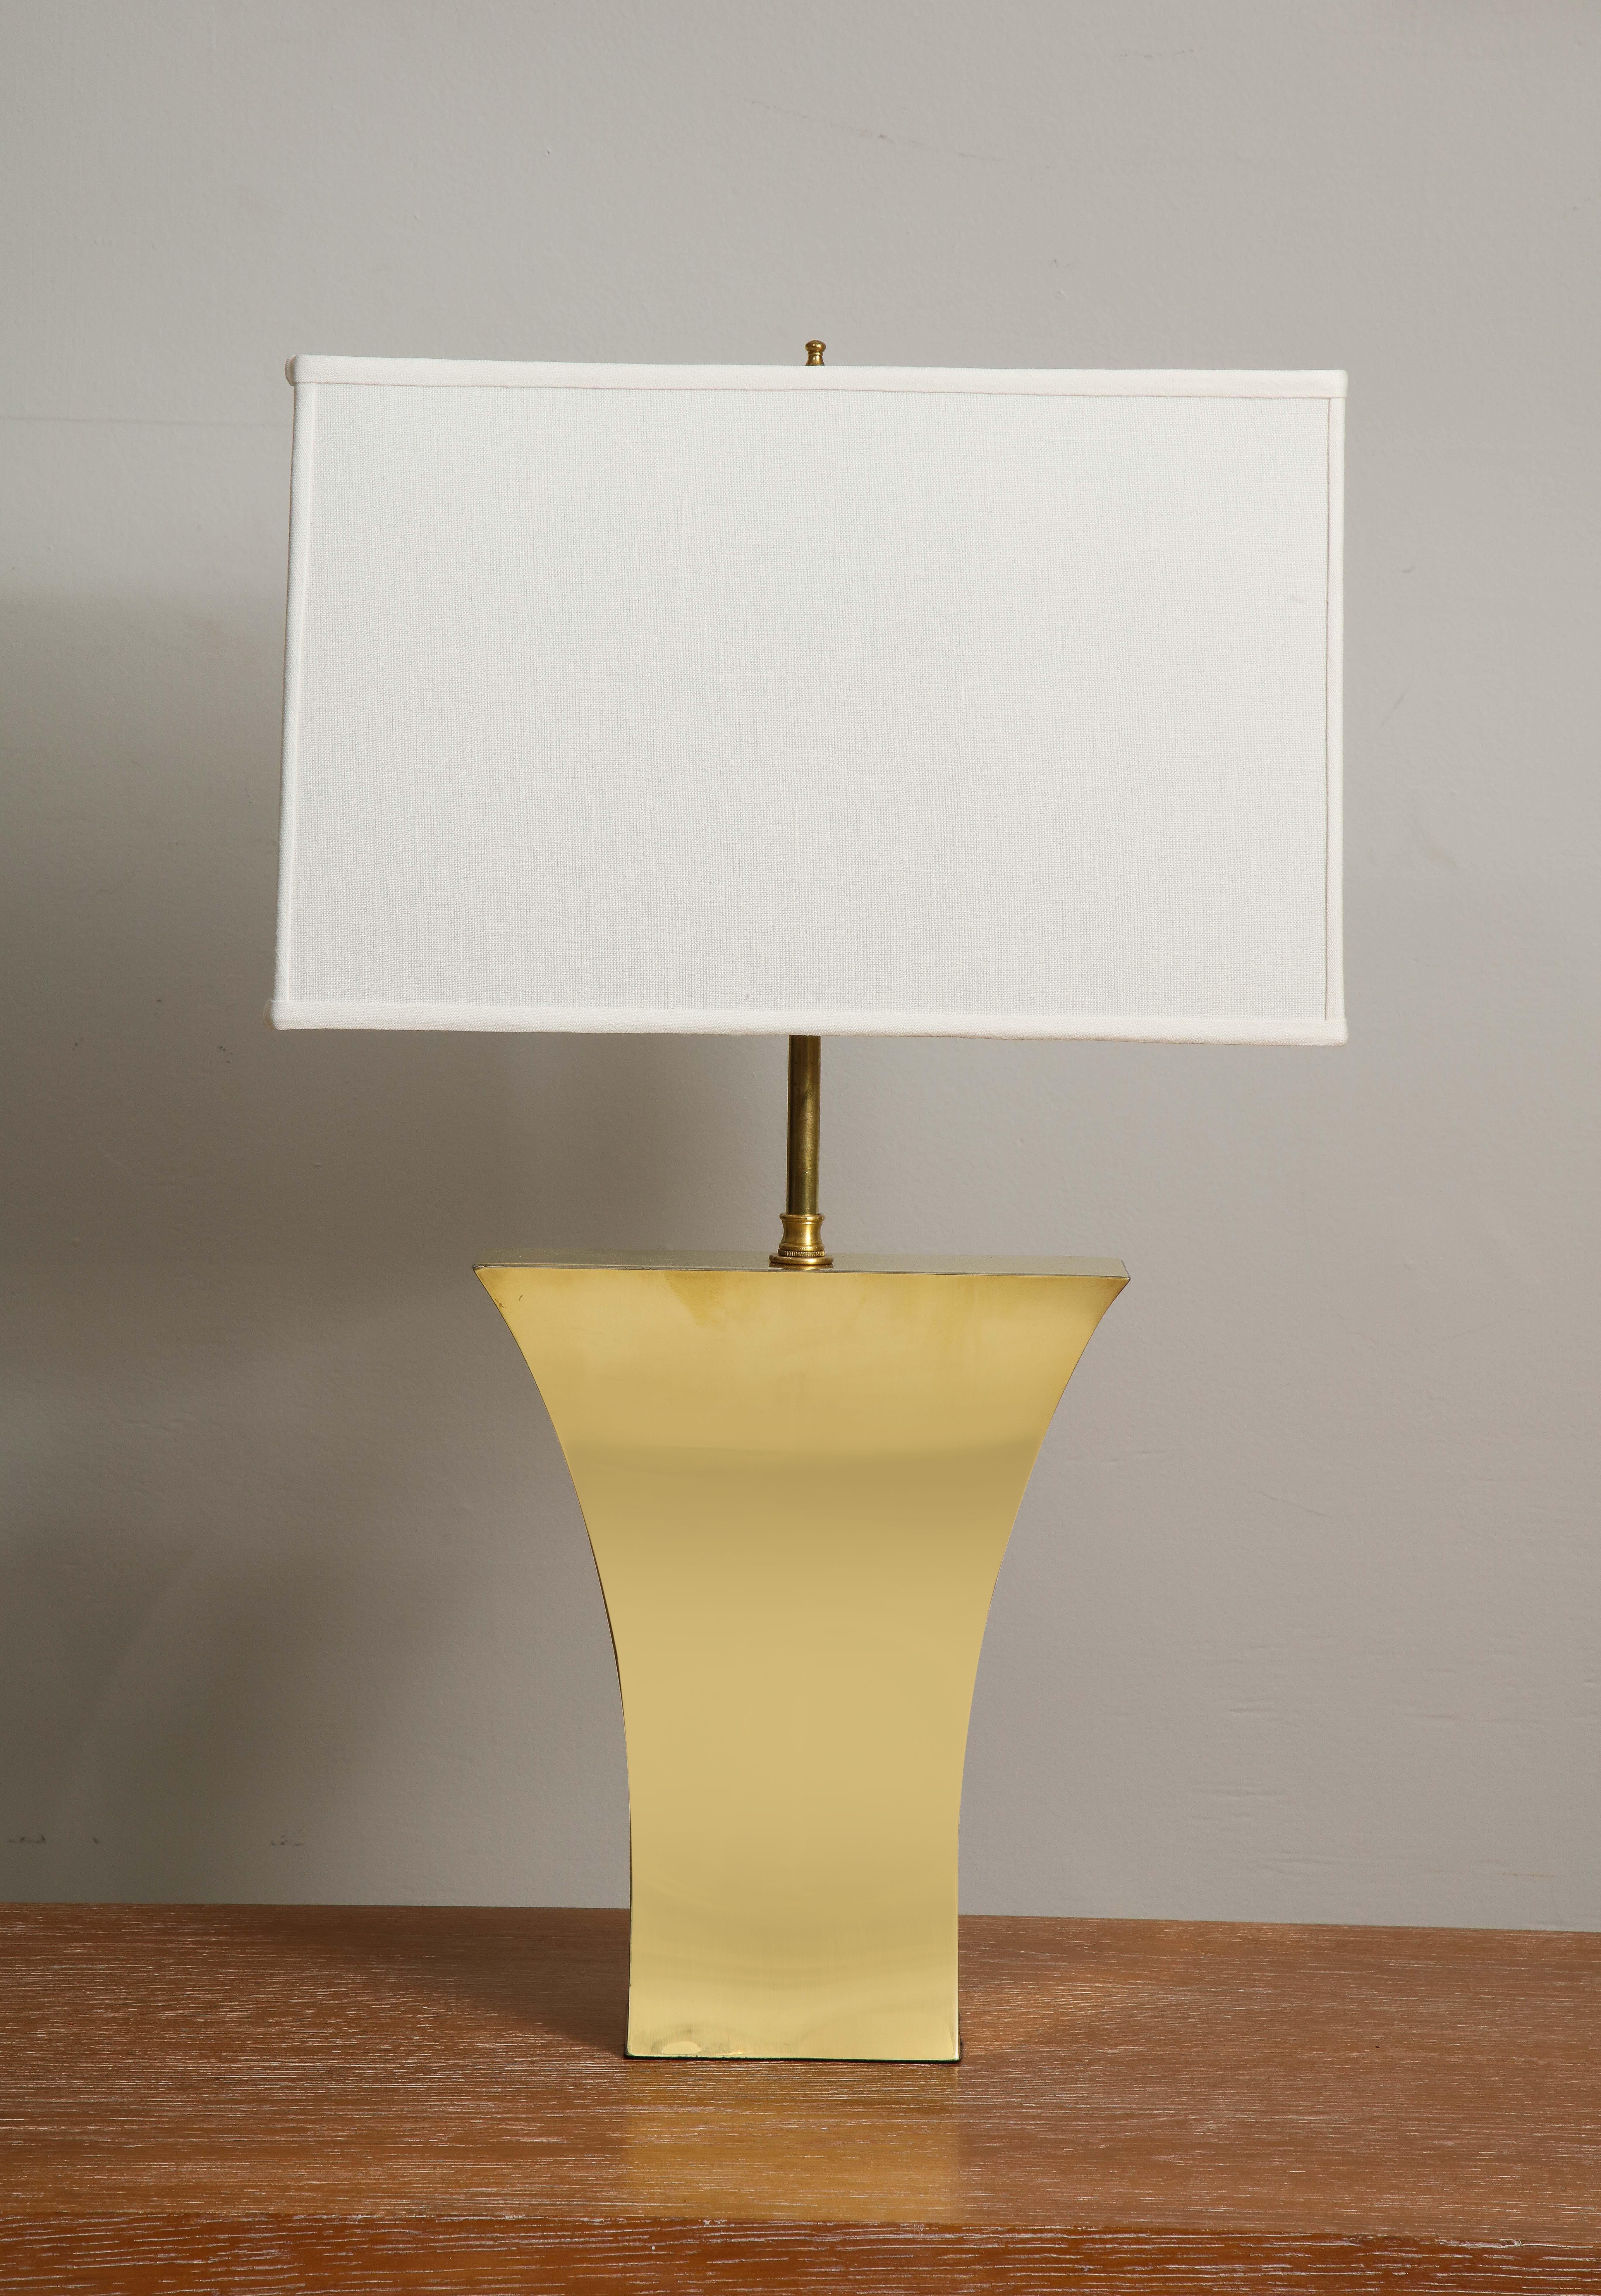 Modernist pair of brass table lamps.
Shades not included. 
Please note overall height is 26